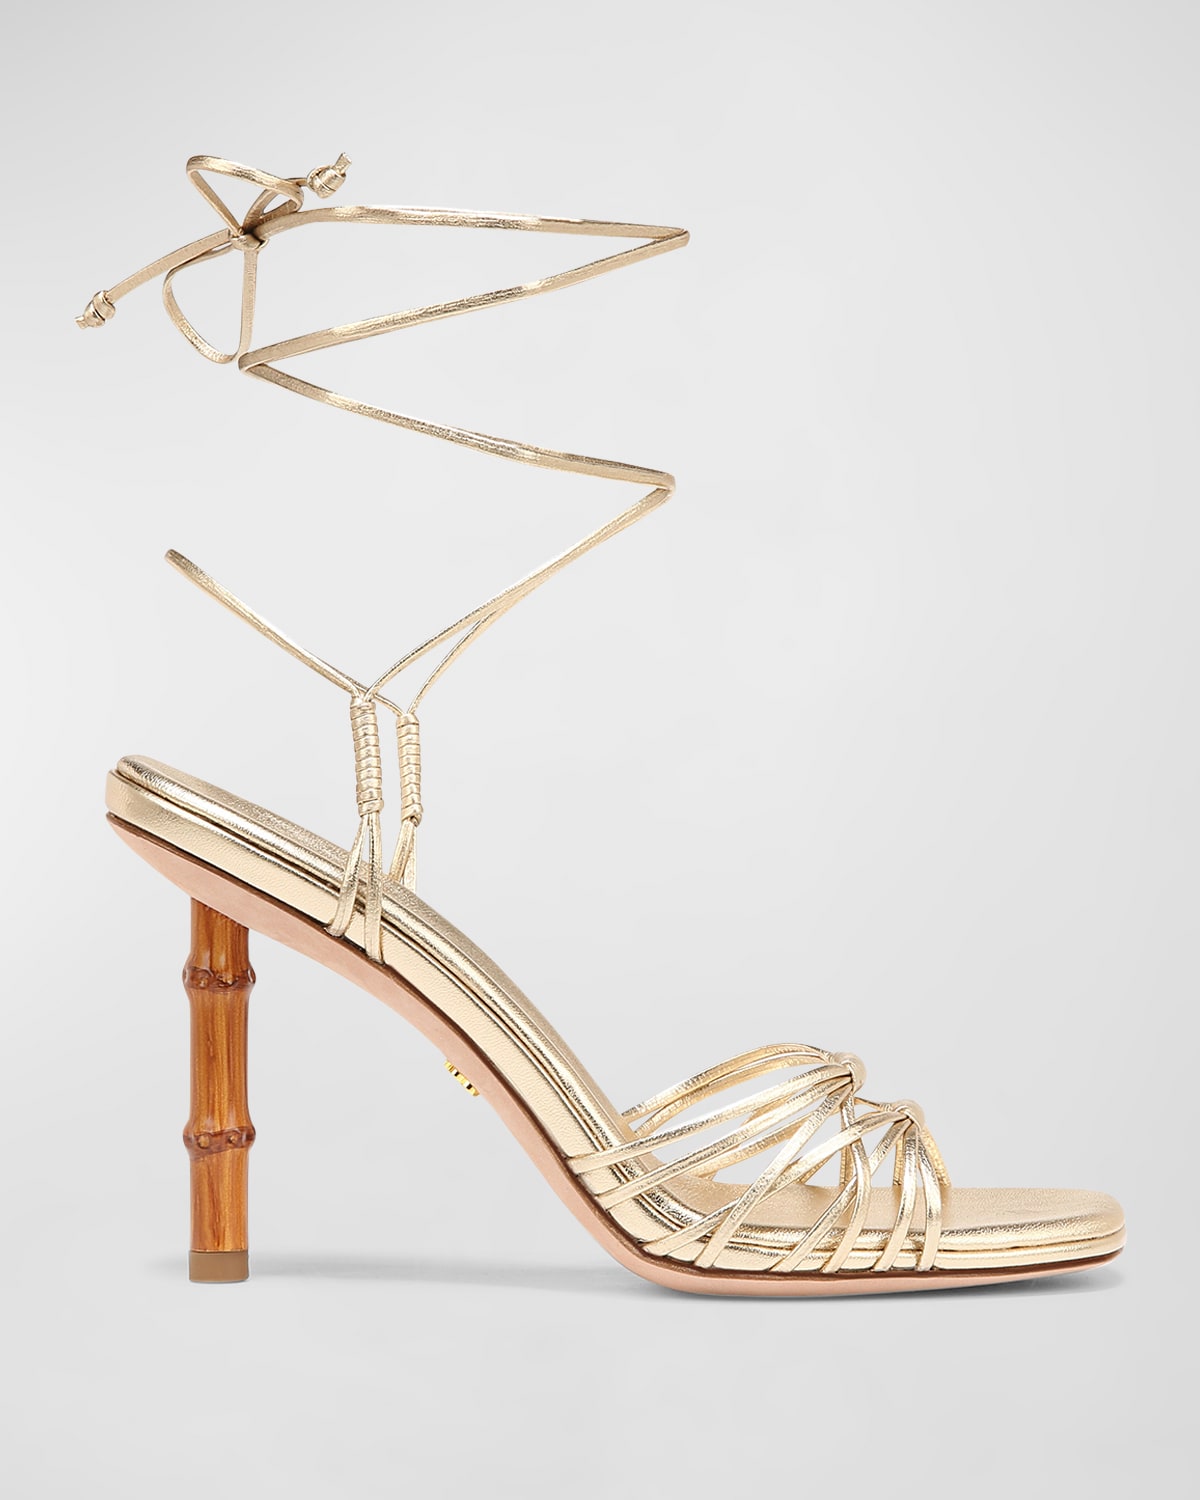 VERONICA BEARD CABOT STRAPPY METALLIC ANKLE-WRAP SANDALS